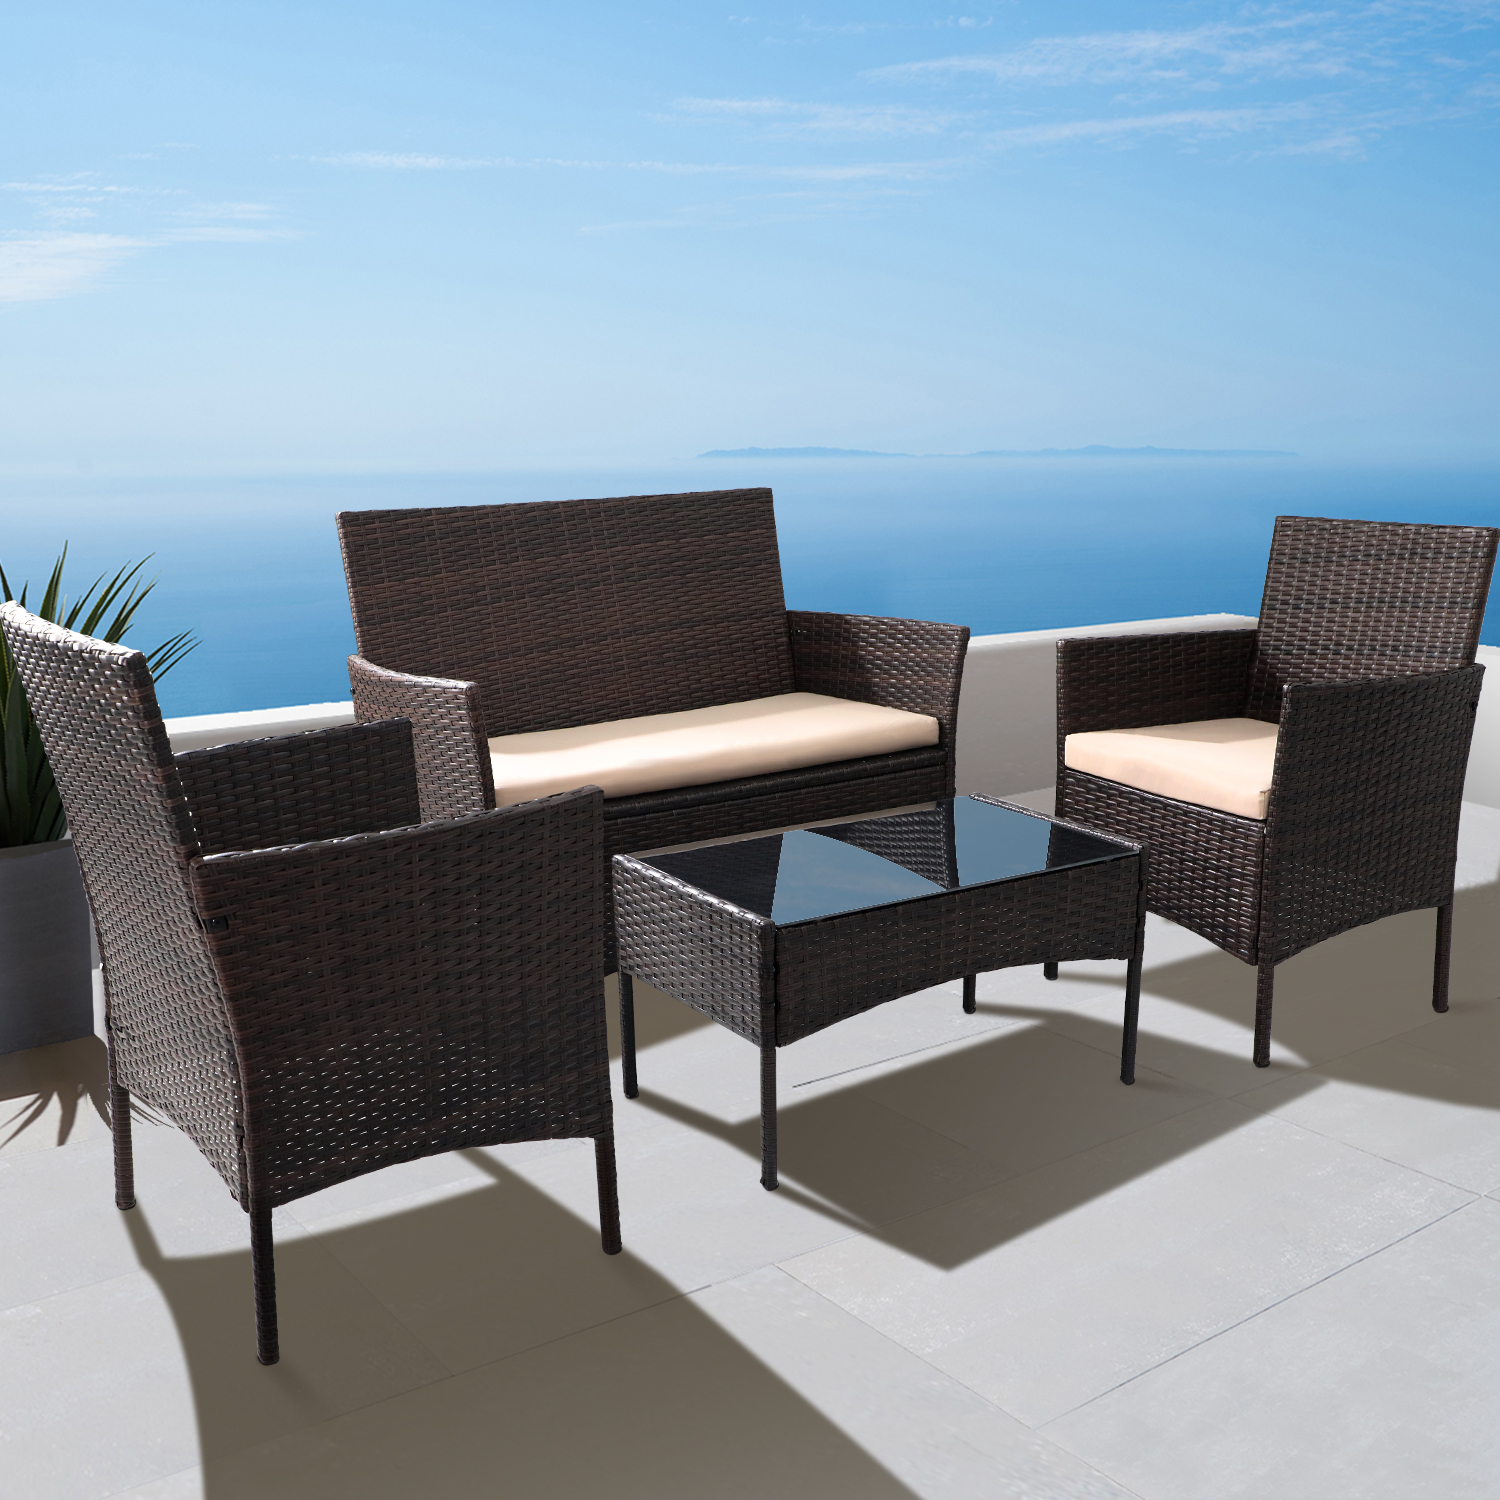 Lacoo 4 Pieces Outdoor Patio Furniture Sets Rattan Chair Wicker Set for Backyard Porch Garden Poolside Balcony - image 1 of 5